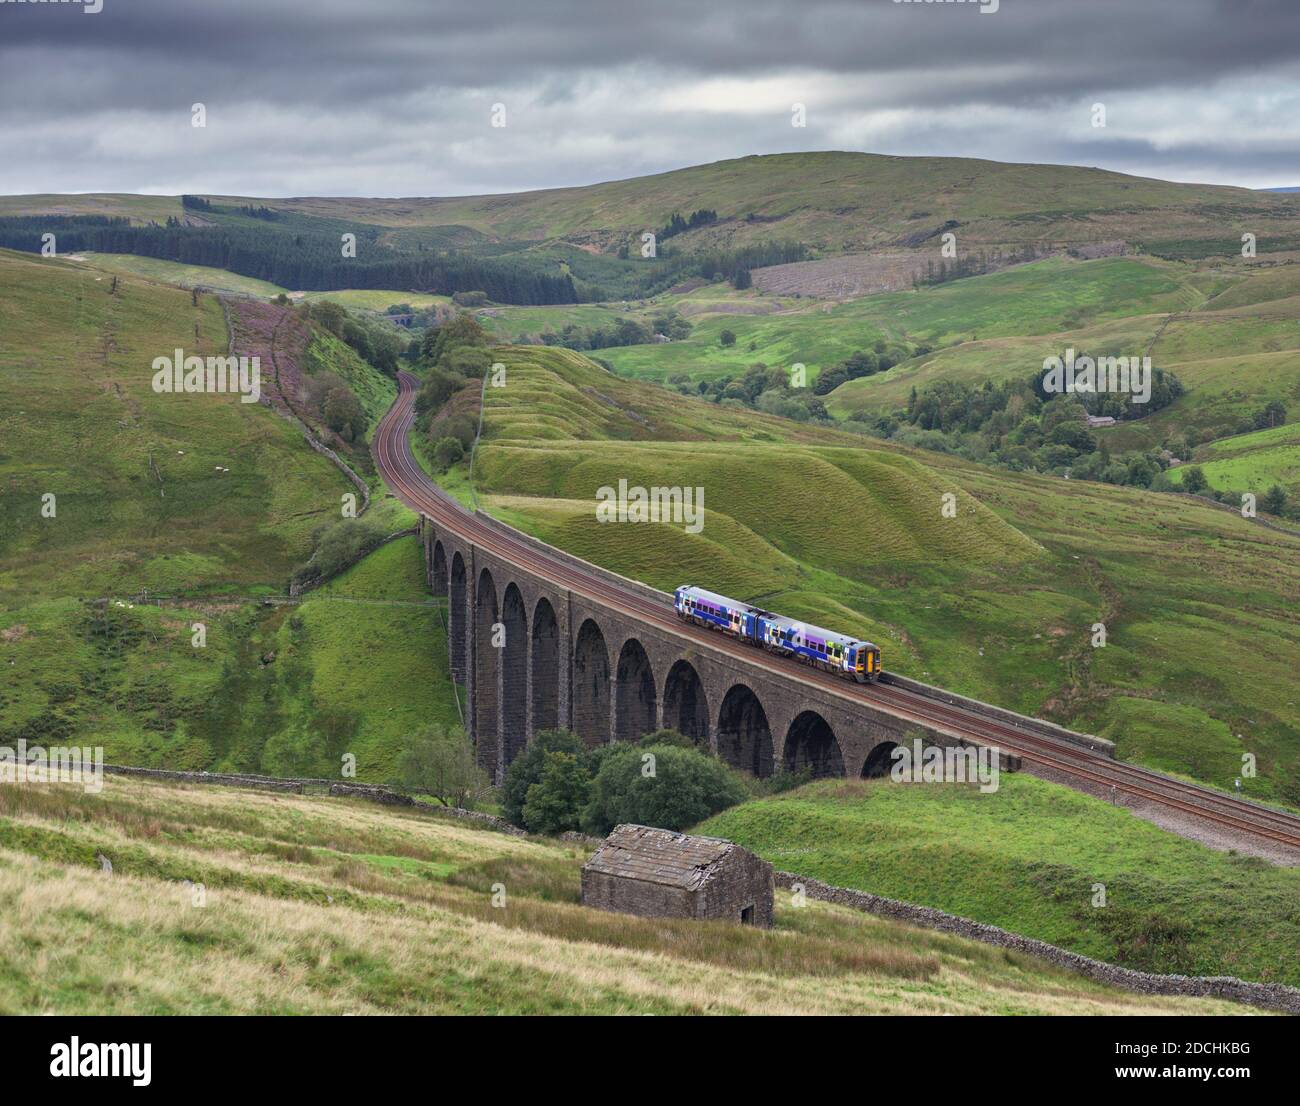 Northern Rail class 158 express sprinter train crossing Arten Gill viaduct in the landscape on the scenic Settle to Carlisle railway line Stock Photo